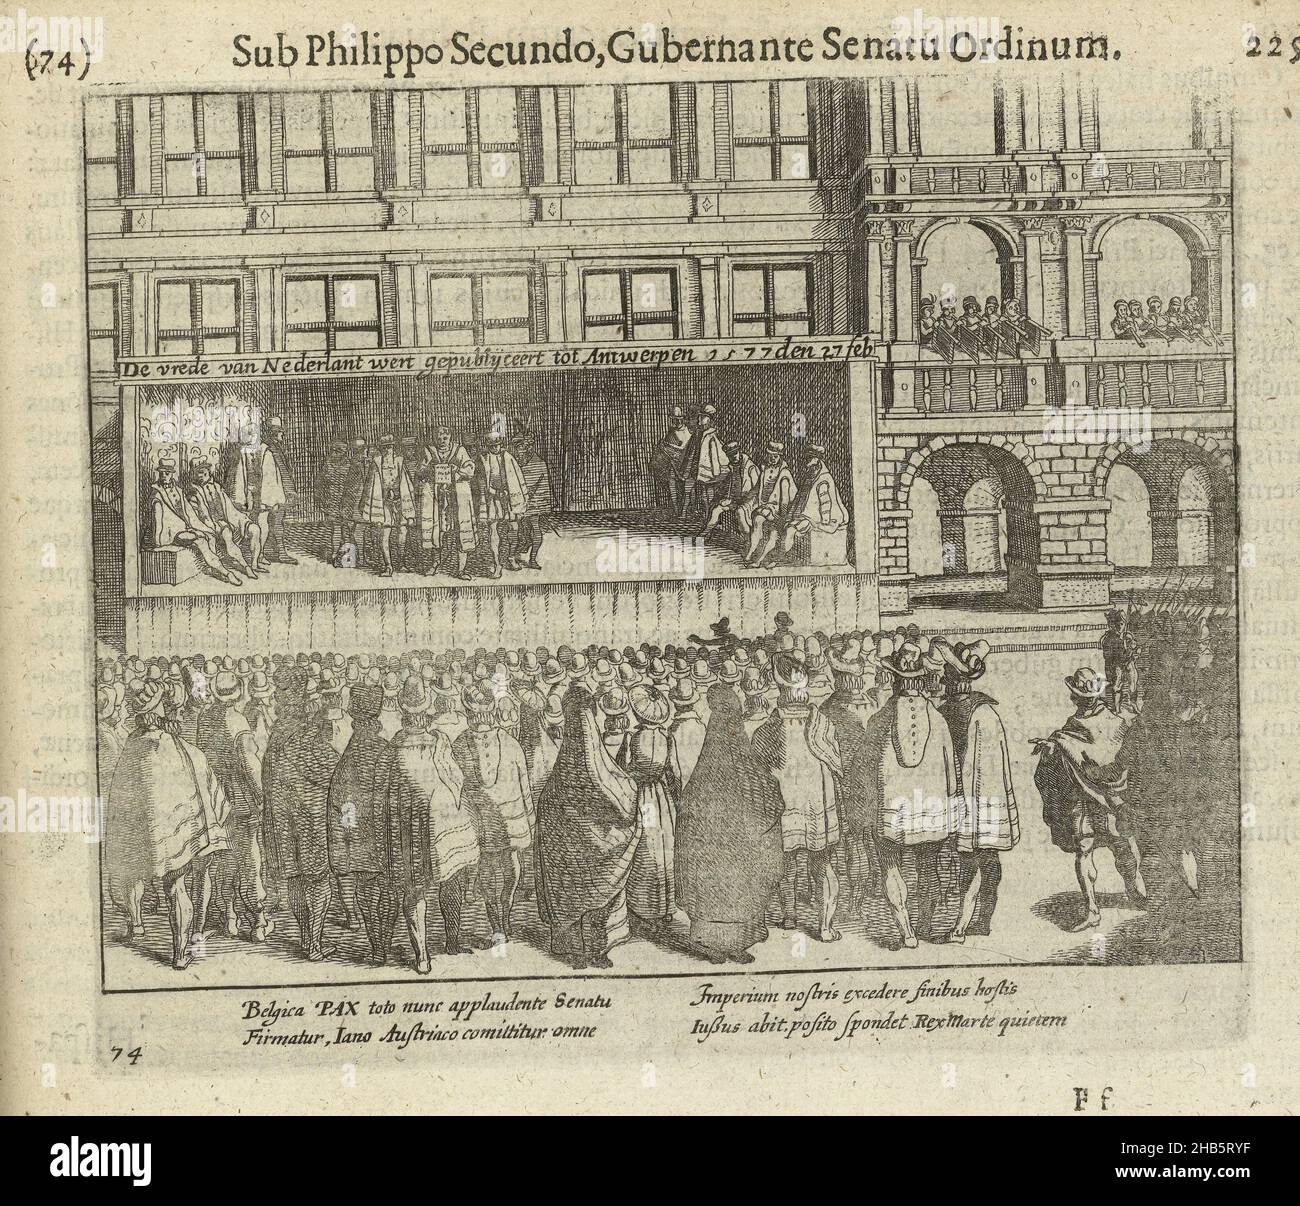 Proclamation of the Eternal Edict, 1577, De vrede van nederlant wert gepublijceert tot Antwerpen 1577 den 27 Feb (title on object), Proclamation of the Eternal Edict in front of the town hall of Antwerp. On February 27, 1577 (the date mentioned on the print) the Eternal Edict was proclaimed in Antwerp. In it, the governor Don Juan confirmed the decisions laid down in the Pacification of Ghent (signed on 8 November 1576). On a platform in front of the city hall, the peace is announced and read aloud to the audience present. With a 4-line caption in Latin. Numbered: 74. Stock Photo